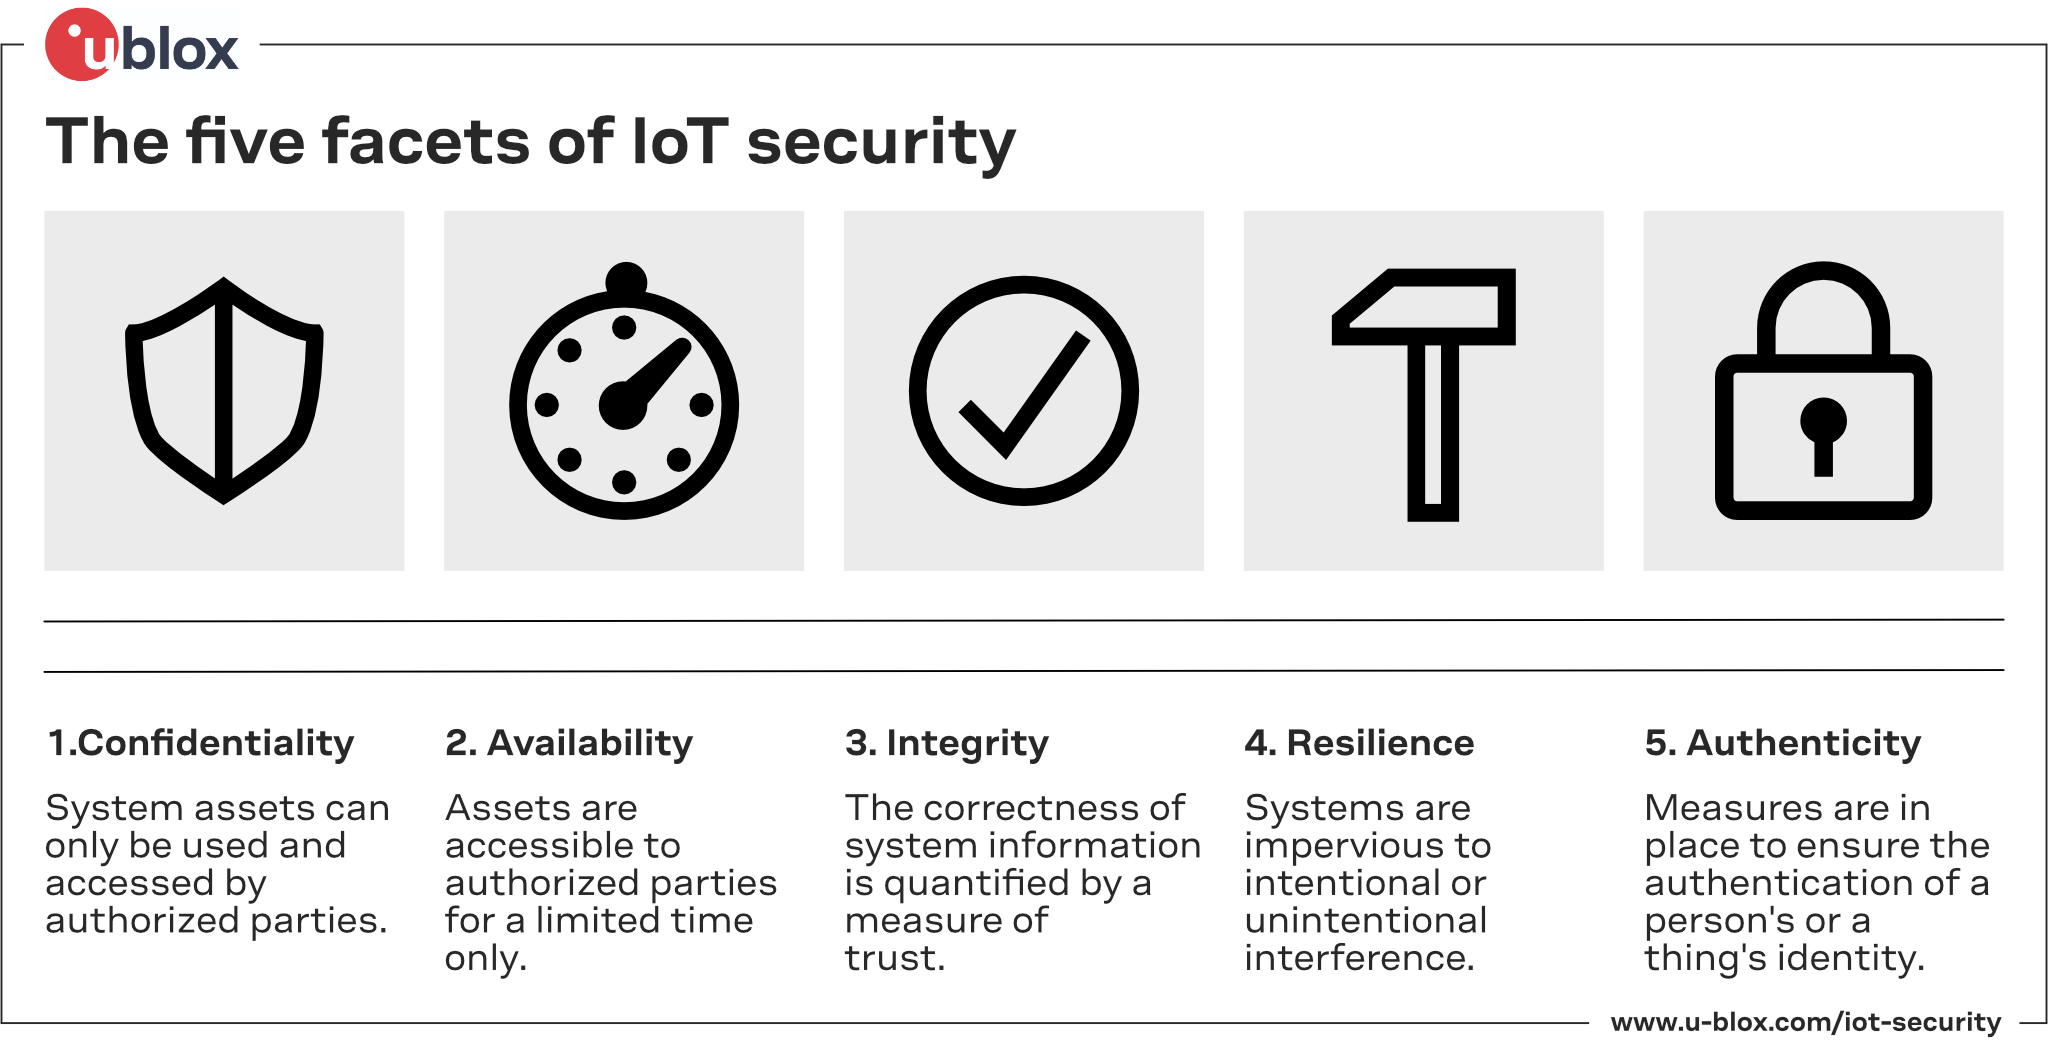 The five facets of IoT security